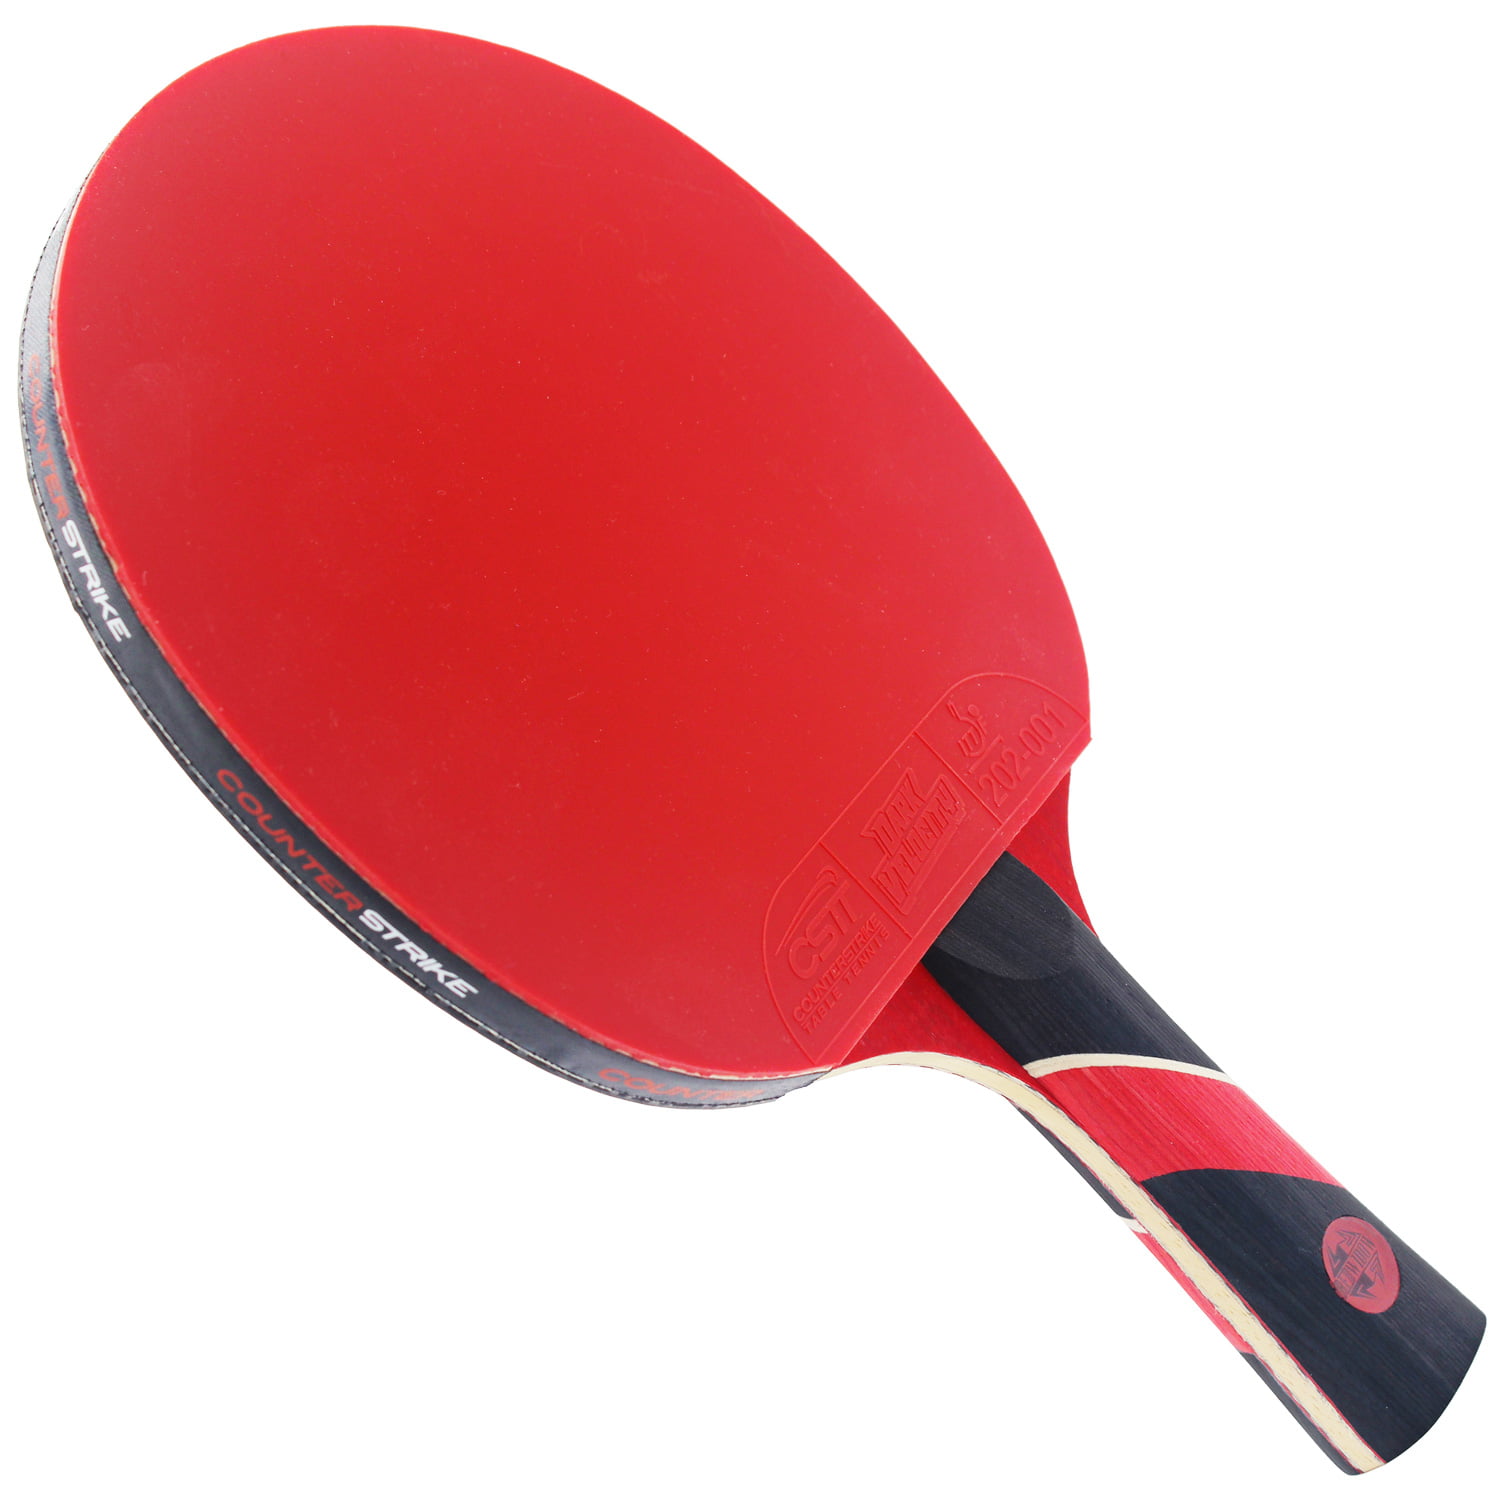 Professional Table Tennis Paddle ITTF Approved Carbon Table Tennis Paddle Includes Hard Case & 6 Balls Red Widow Paddle Bundle Pre-Assembled Paddle | Professional Ping Pong Paddle 